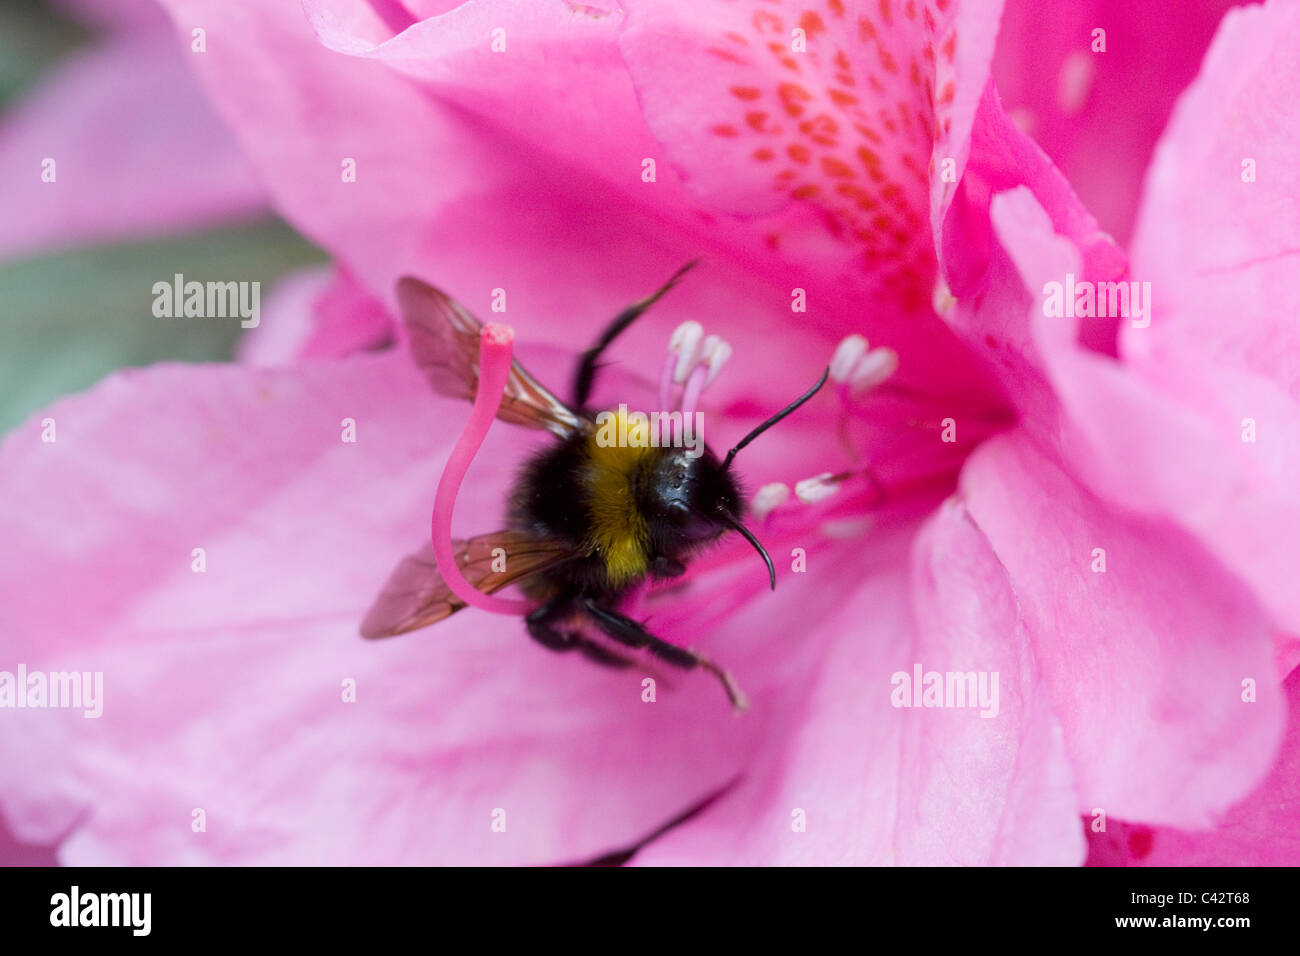 Rhododendron Flower with a bumble bee collecting Pollen Stock Photo